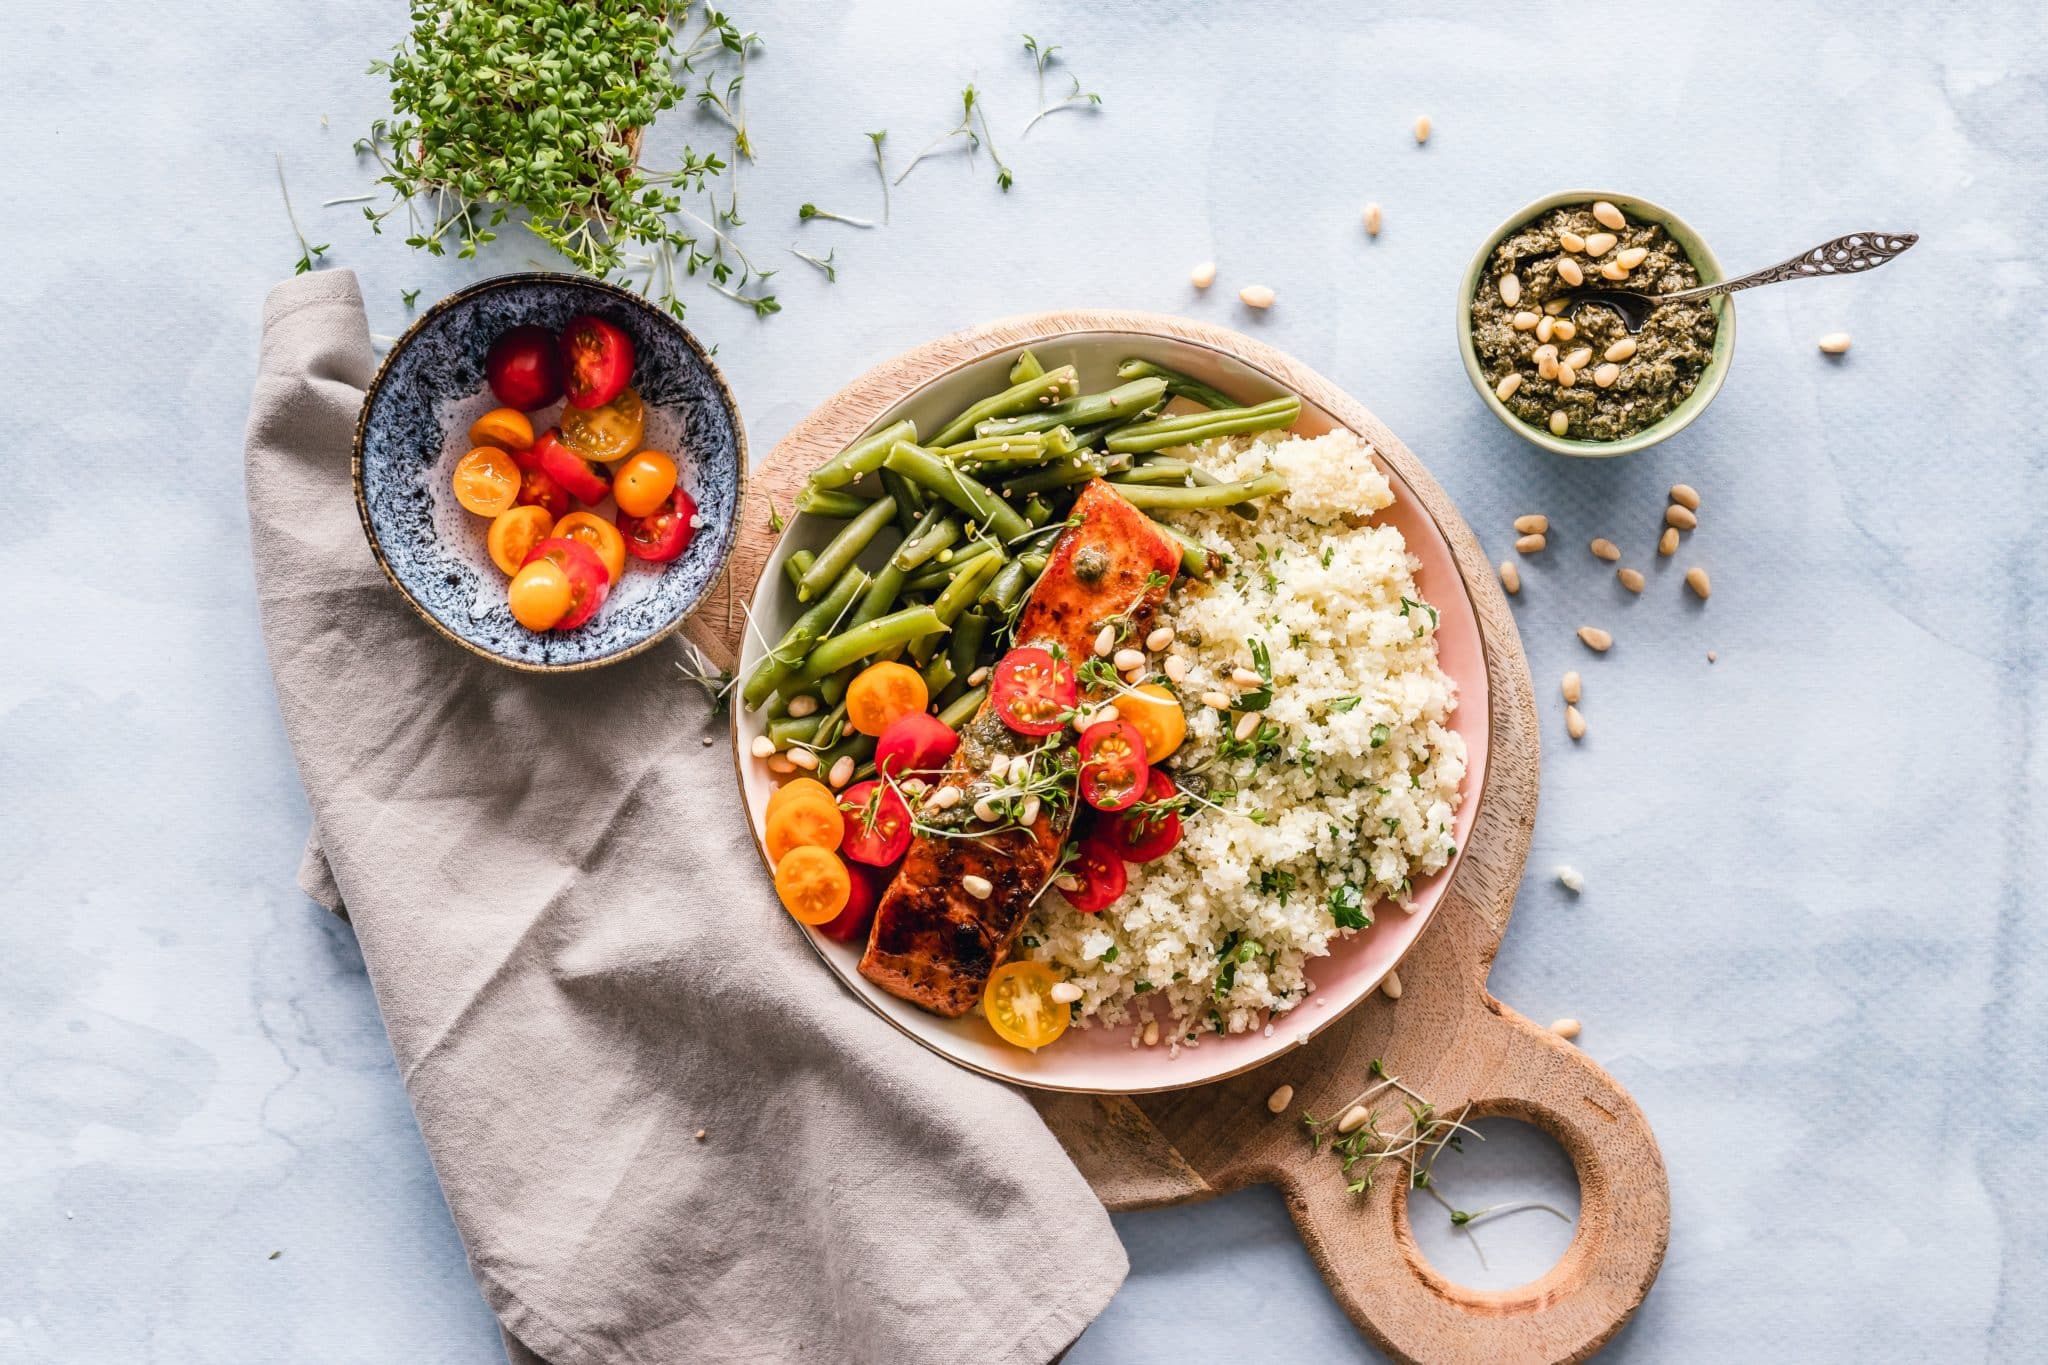 A large bowl of quinoa, salmon, sliced cherry tomatoes, and green beans next to smaller bowls of cherry tomatoes and pesto.